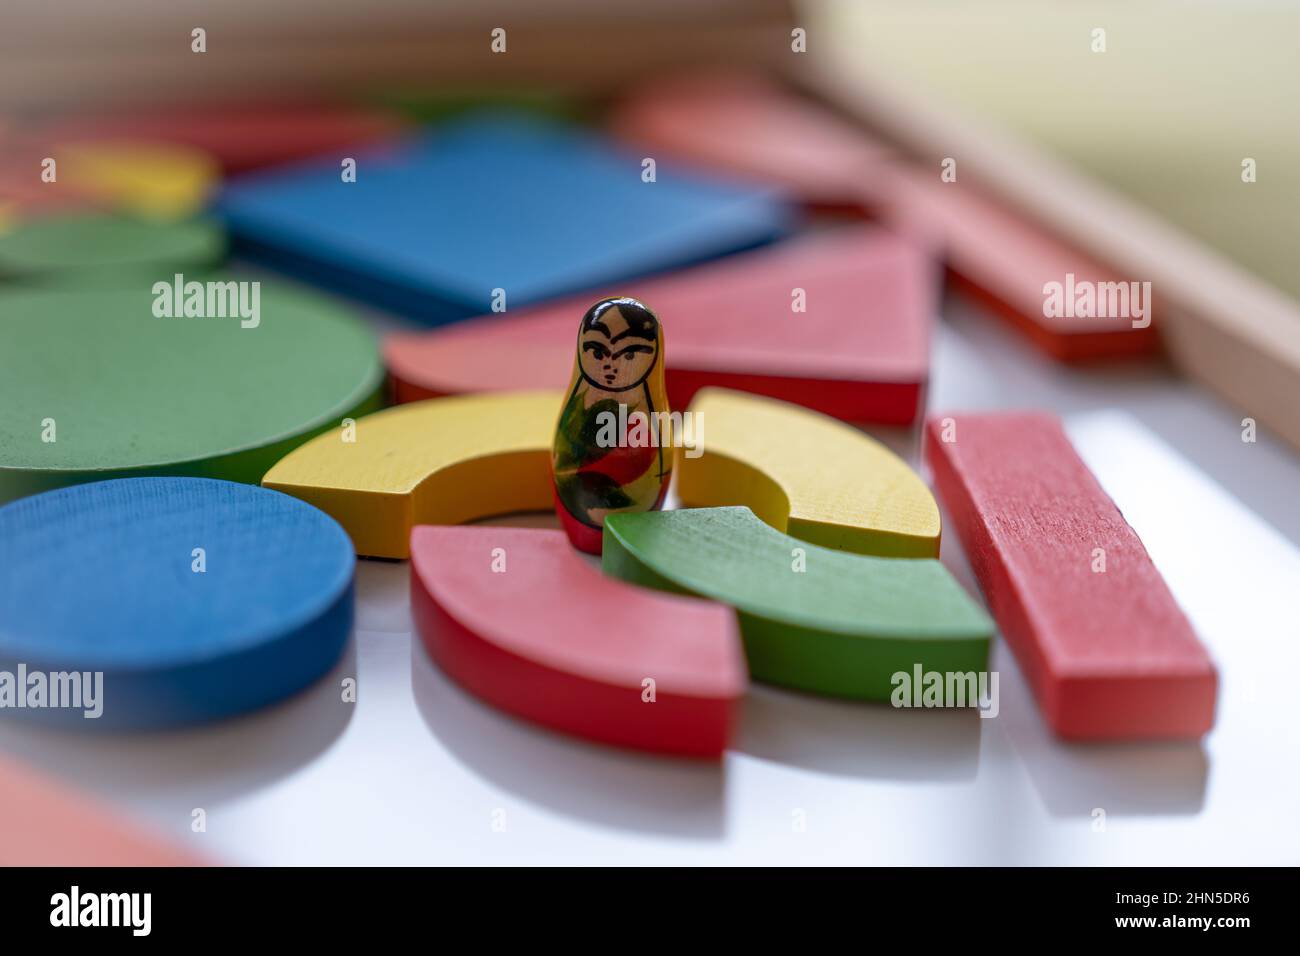 Challenging situation. Smallest Russian doll surrounded by brightly coloured wooden blocks in a tray. Stock Photo